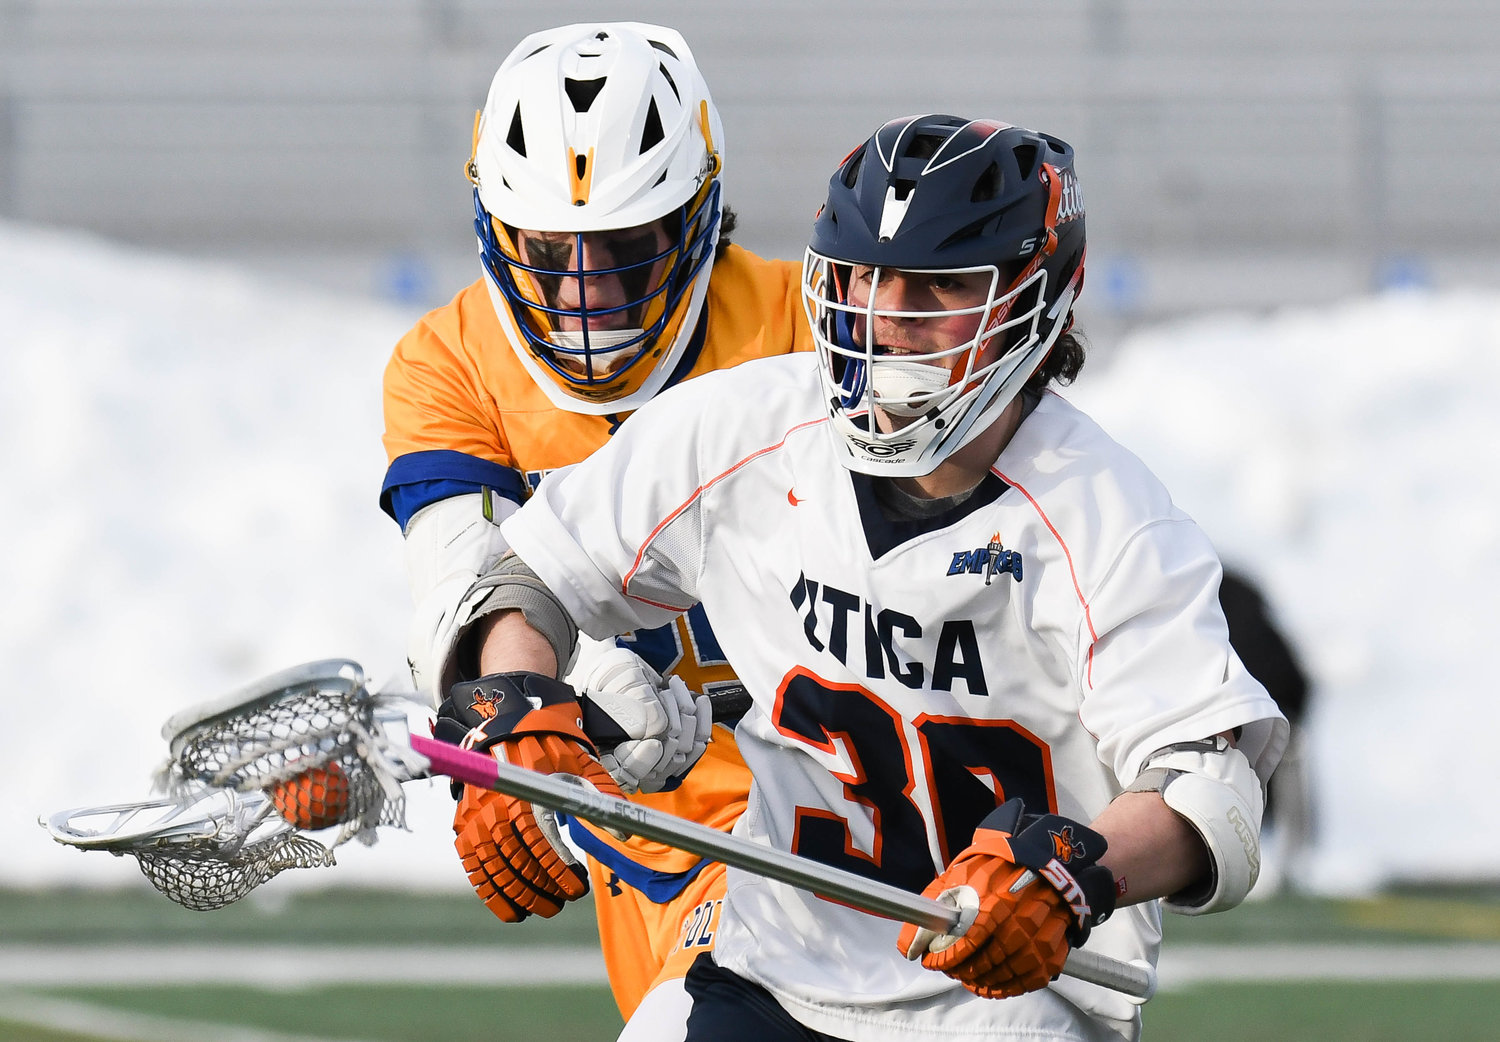 BATTLE — SUNY Poly's Shane Wyman defends Utica University's Andrew Sacco during the men's lacrosse game on Wednesday at Gaetano Stadium. The Pioneers downed the Wildcats 8-4 in the 2022 season opener for Utica.